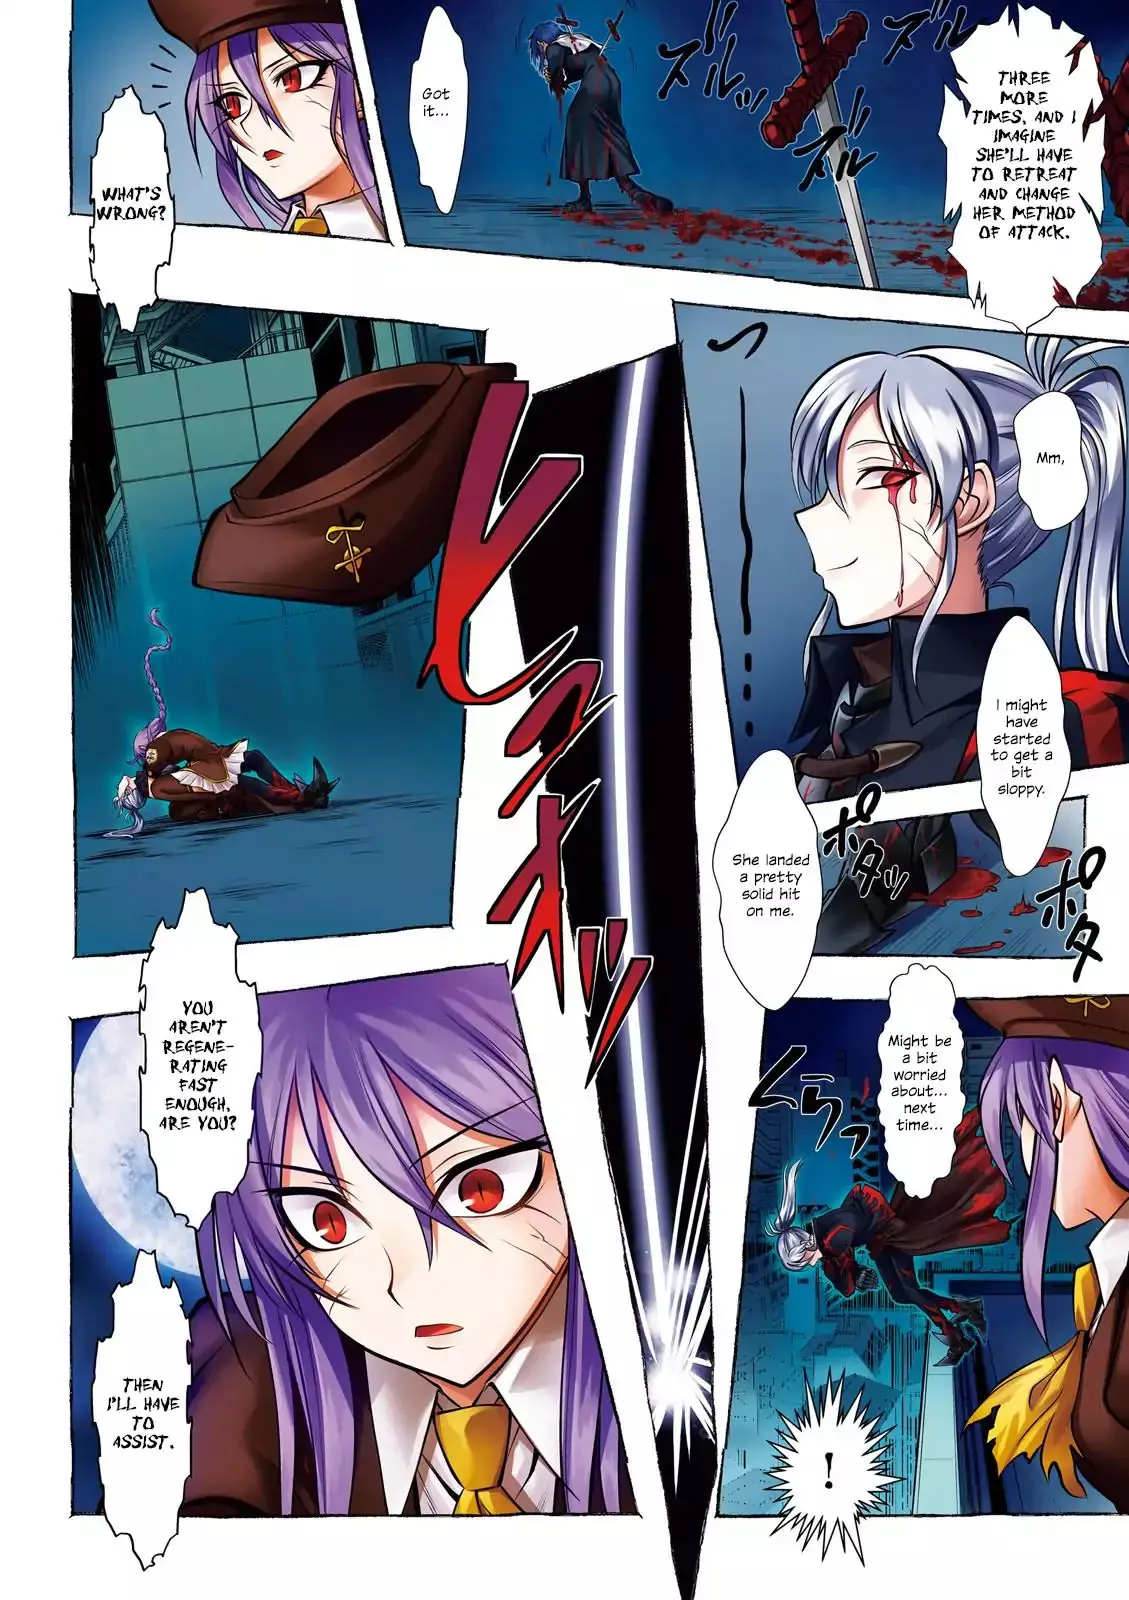 Melty Blood - Back Alley Alliance Nightmare - 6 page 2